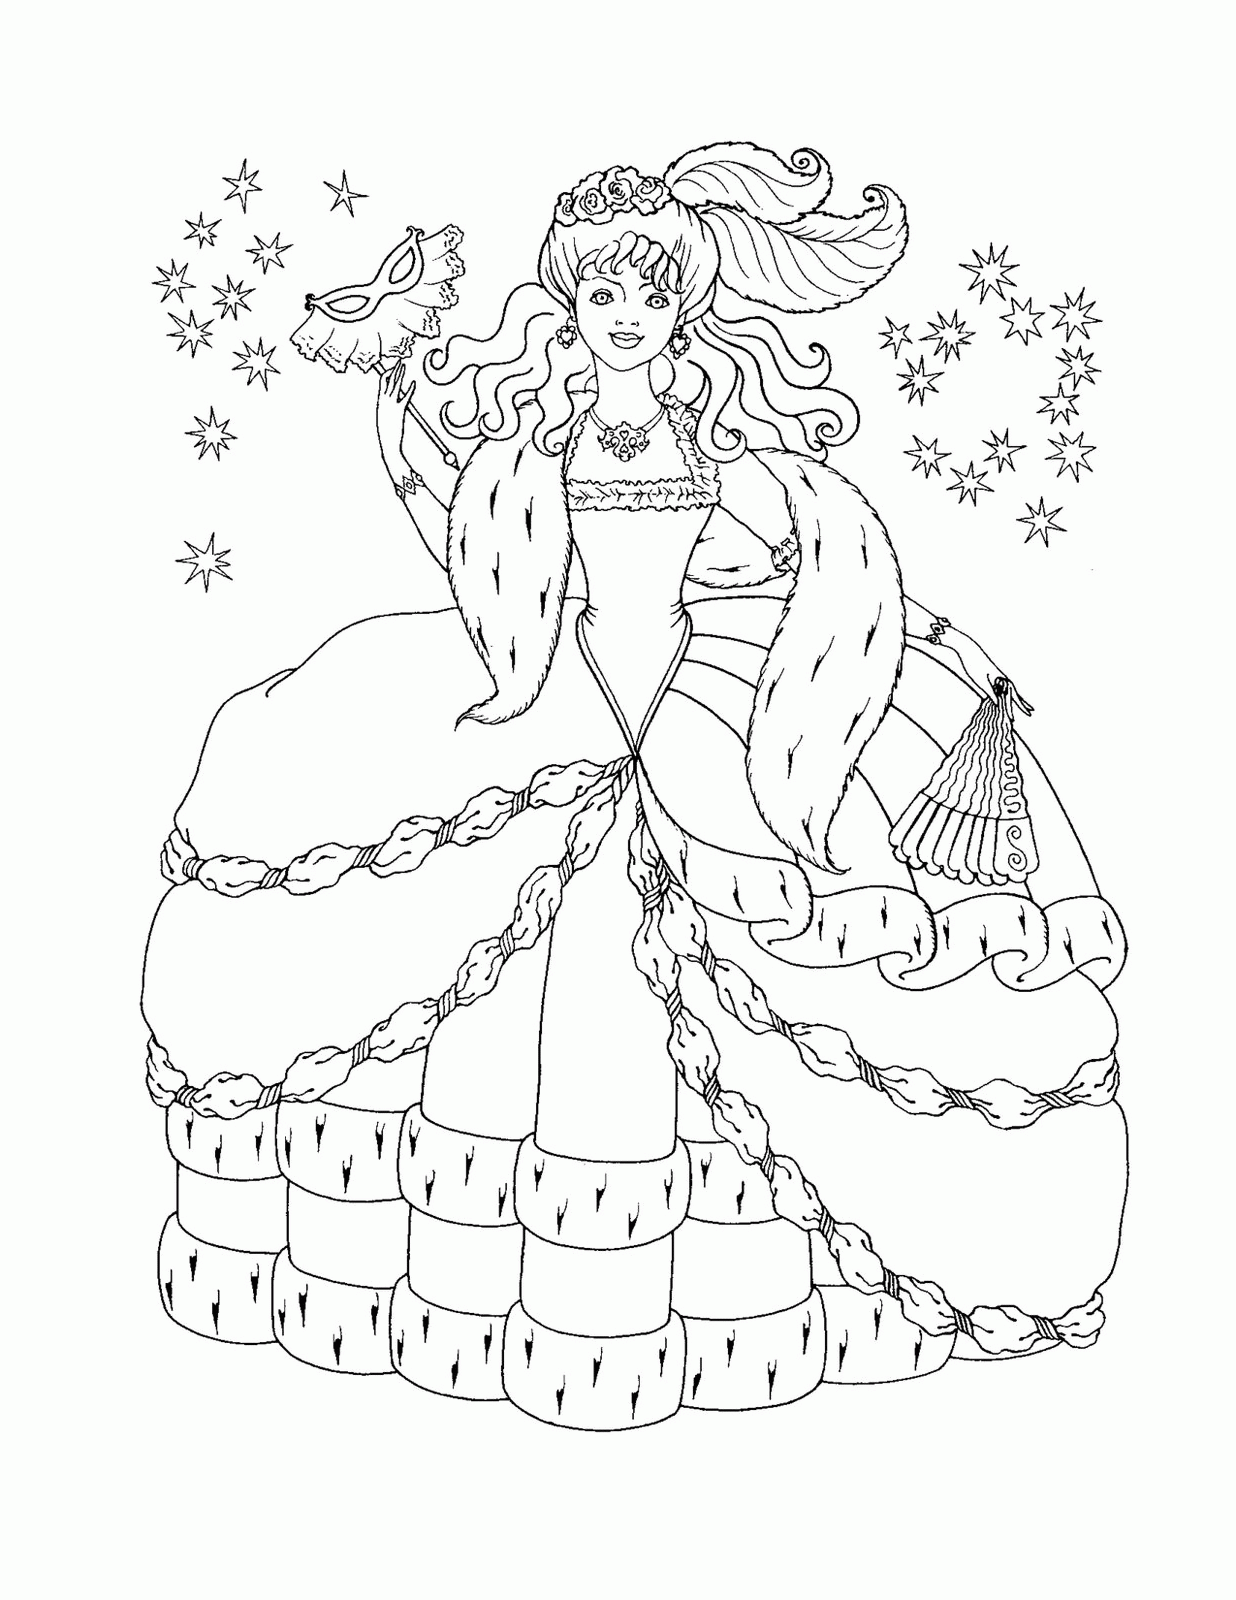 Disney Princess Coloring Pages | #81 Free Printable Coloring Pages ...